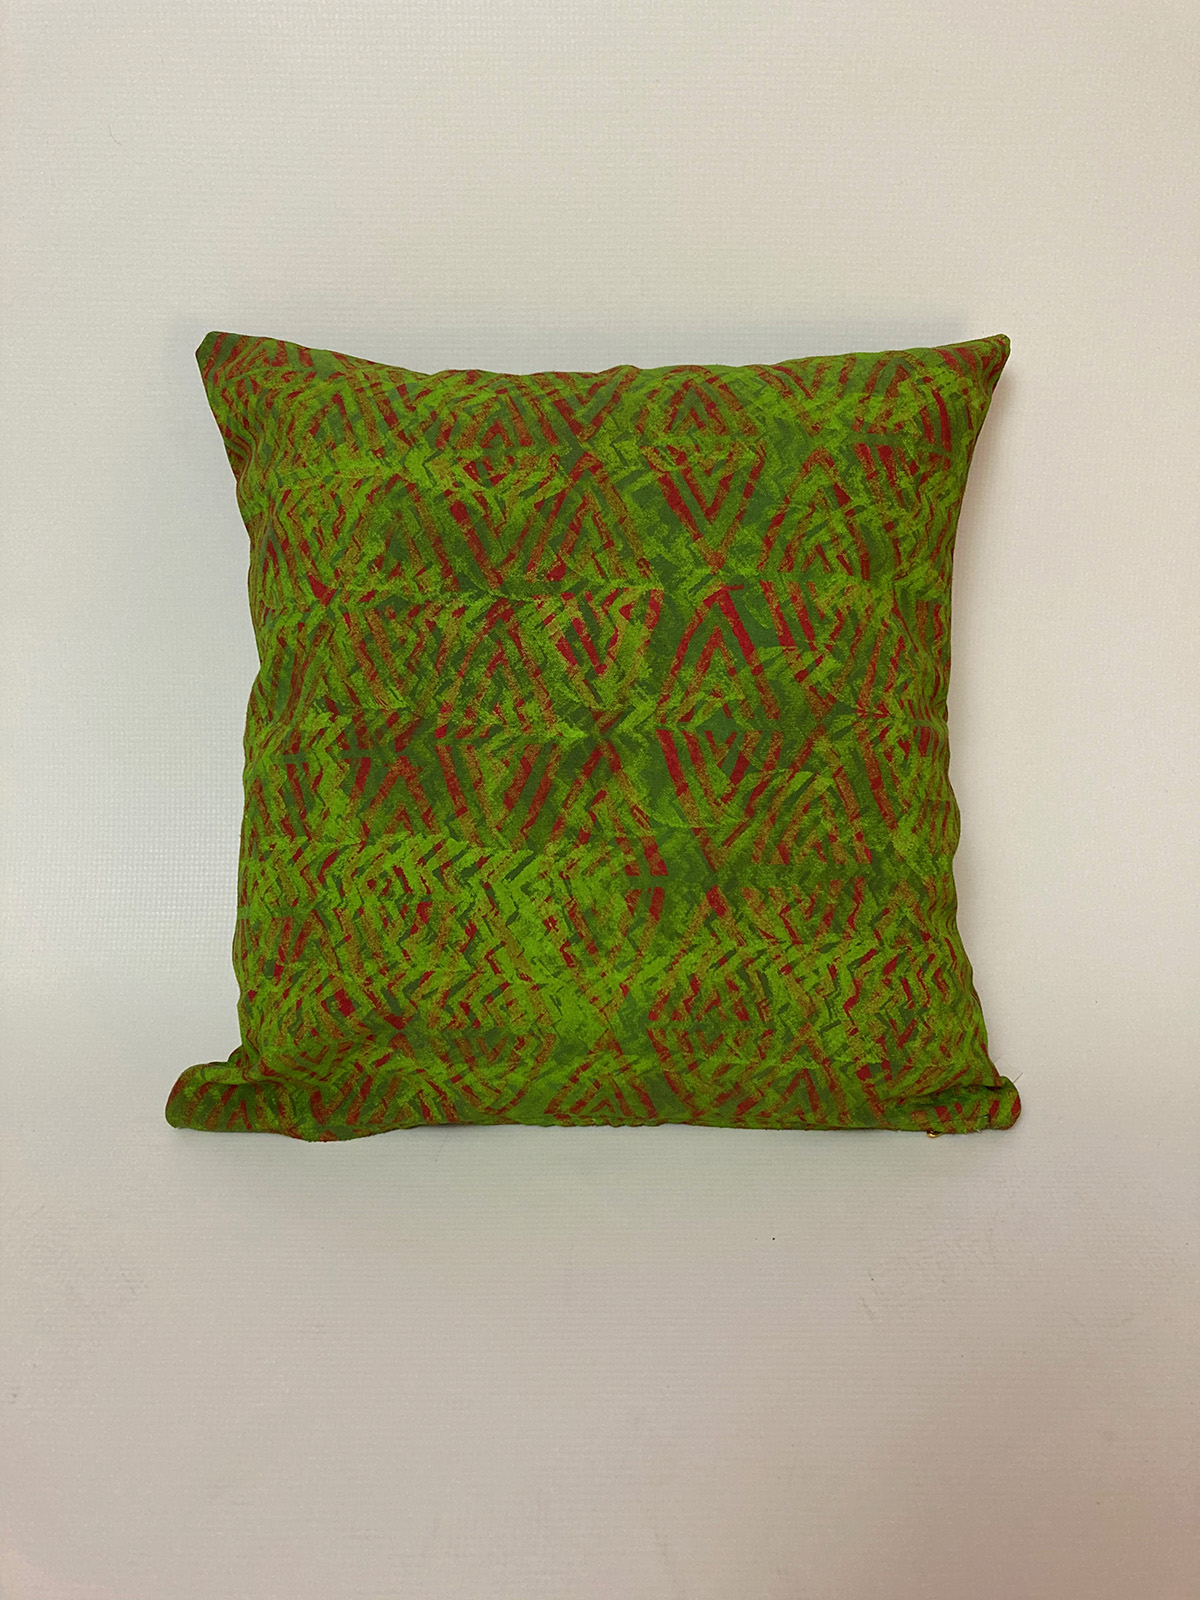 Cushion cover potato print green and red